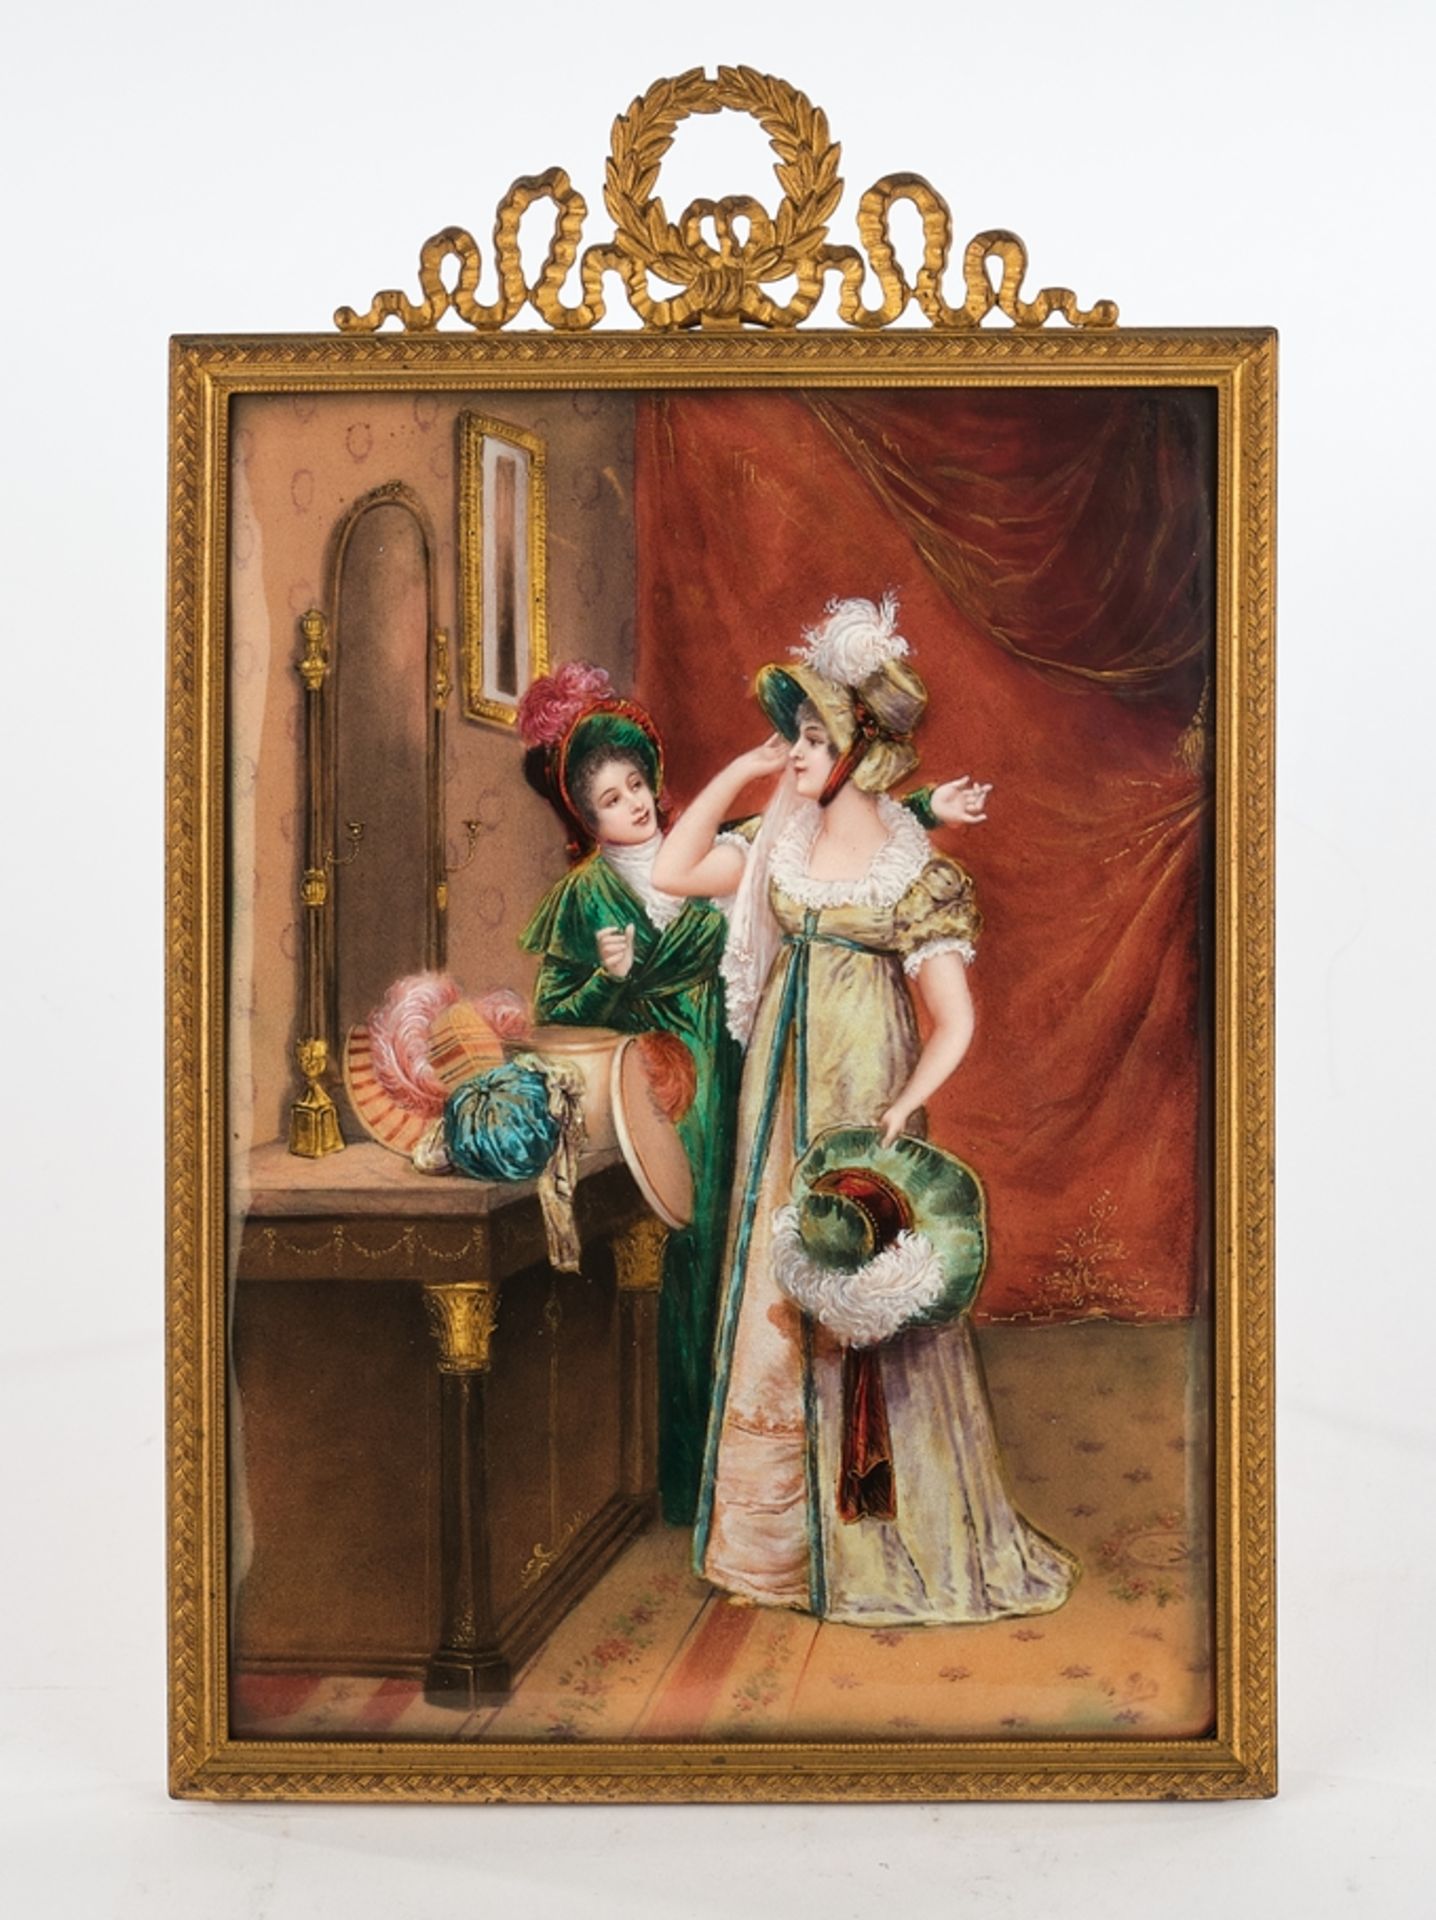 Enamel painting, , "At the milliner's", probably Limoges, around 1900, enamel on copper, polychrome - Image 2 of 3